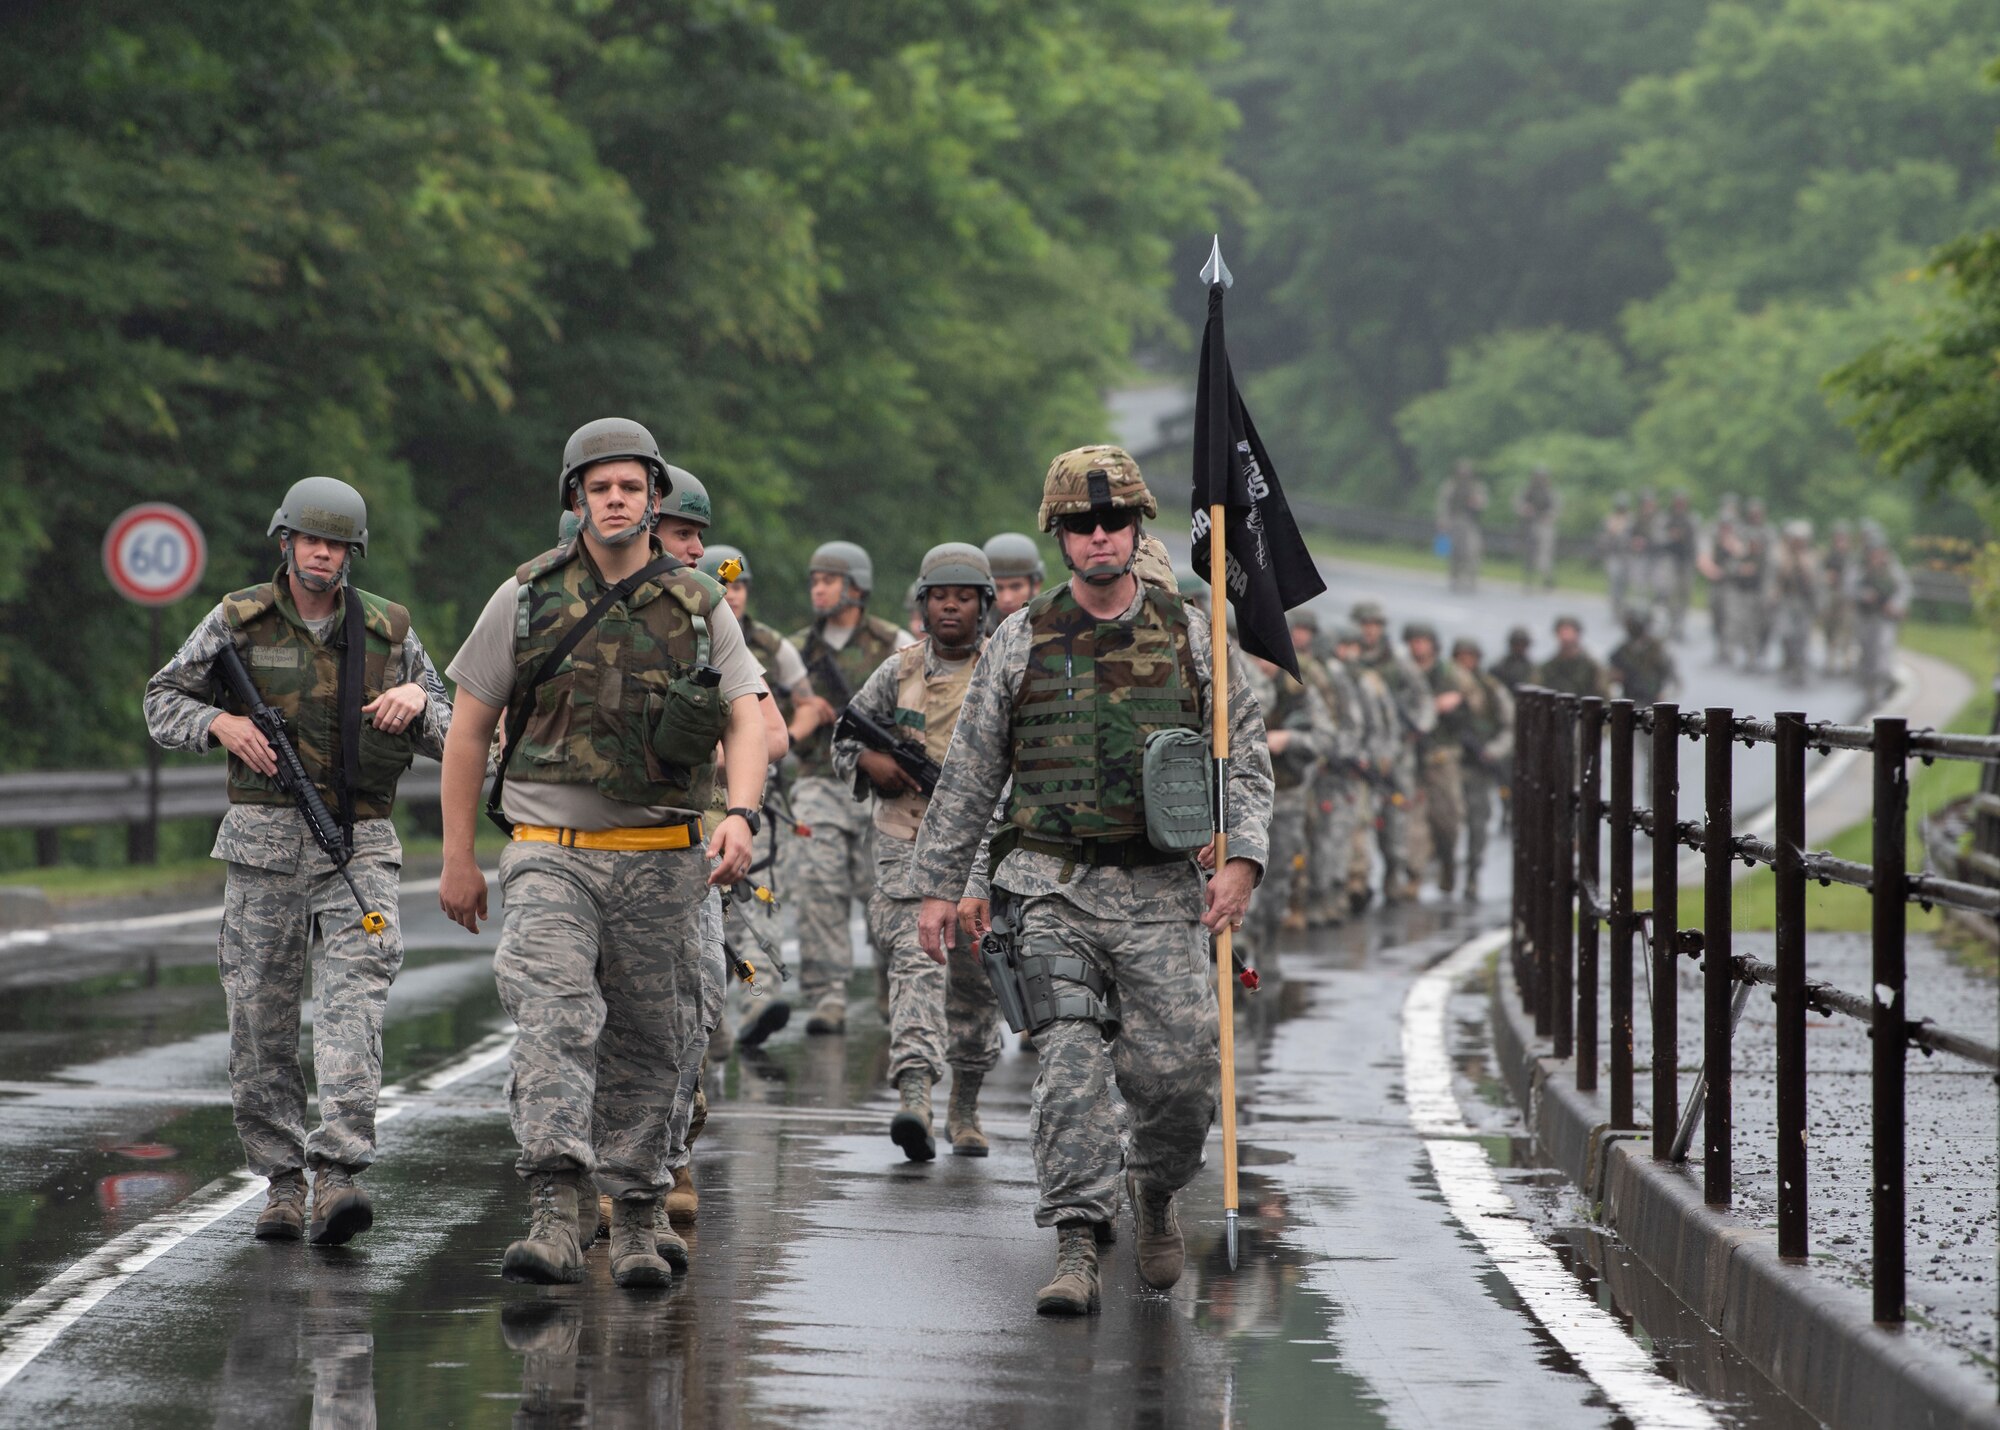 Airmen with the 35th Logistics Readiness Squadron ruck in the rain during an agile combat employment exercise at Misawa Air Base, Japan, June 28, 2019. The members performed a loose formation ruck to “Camp Defender,” where they learned how to move, shoot and communicate during realistic training scenarios. (U.S. Air Force photo by Staff Sgt. Brittany A. Chase)